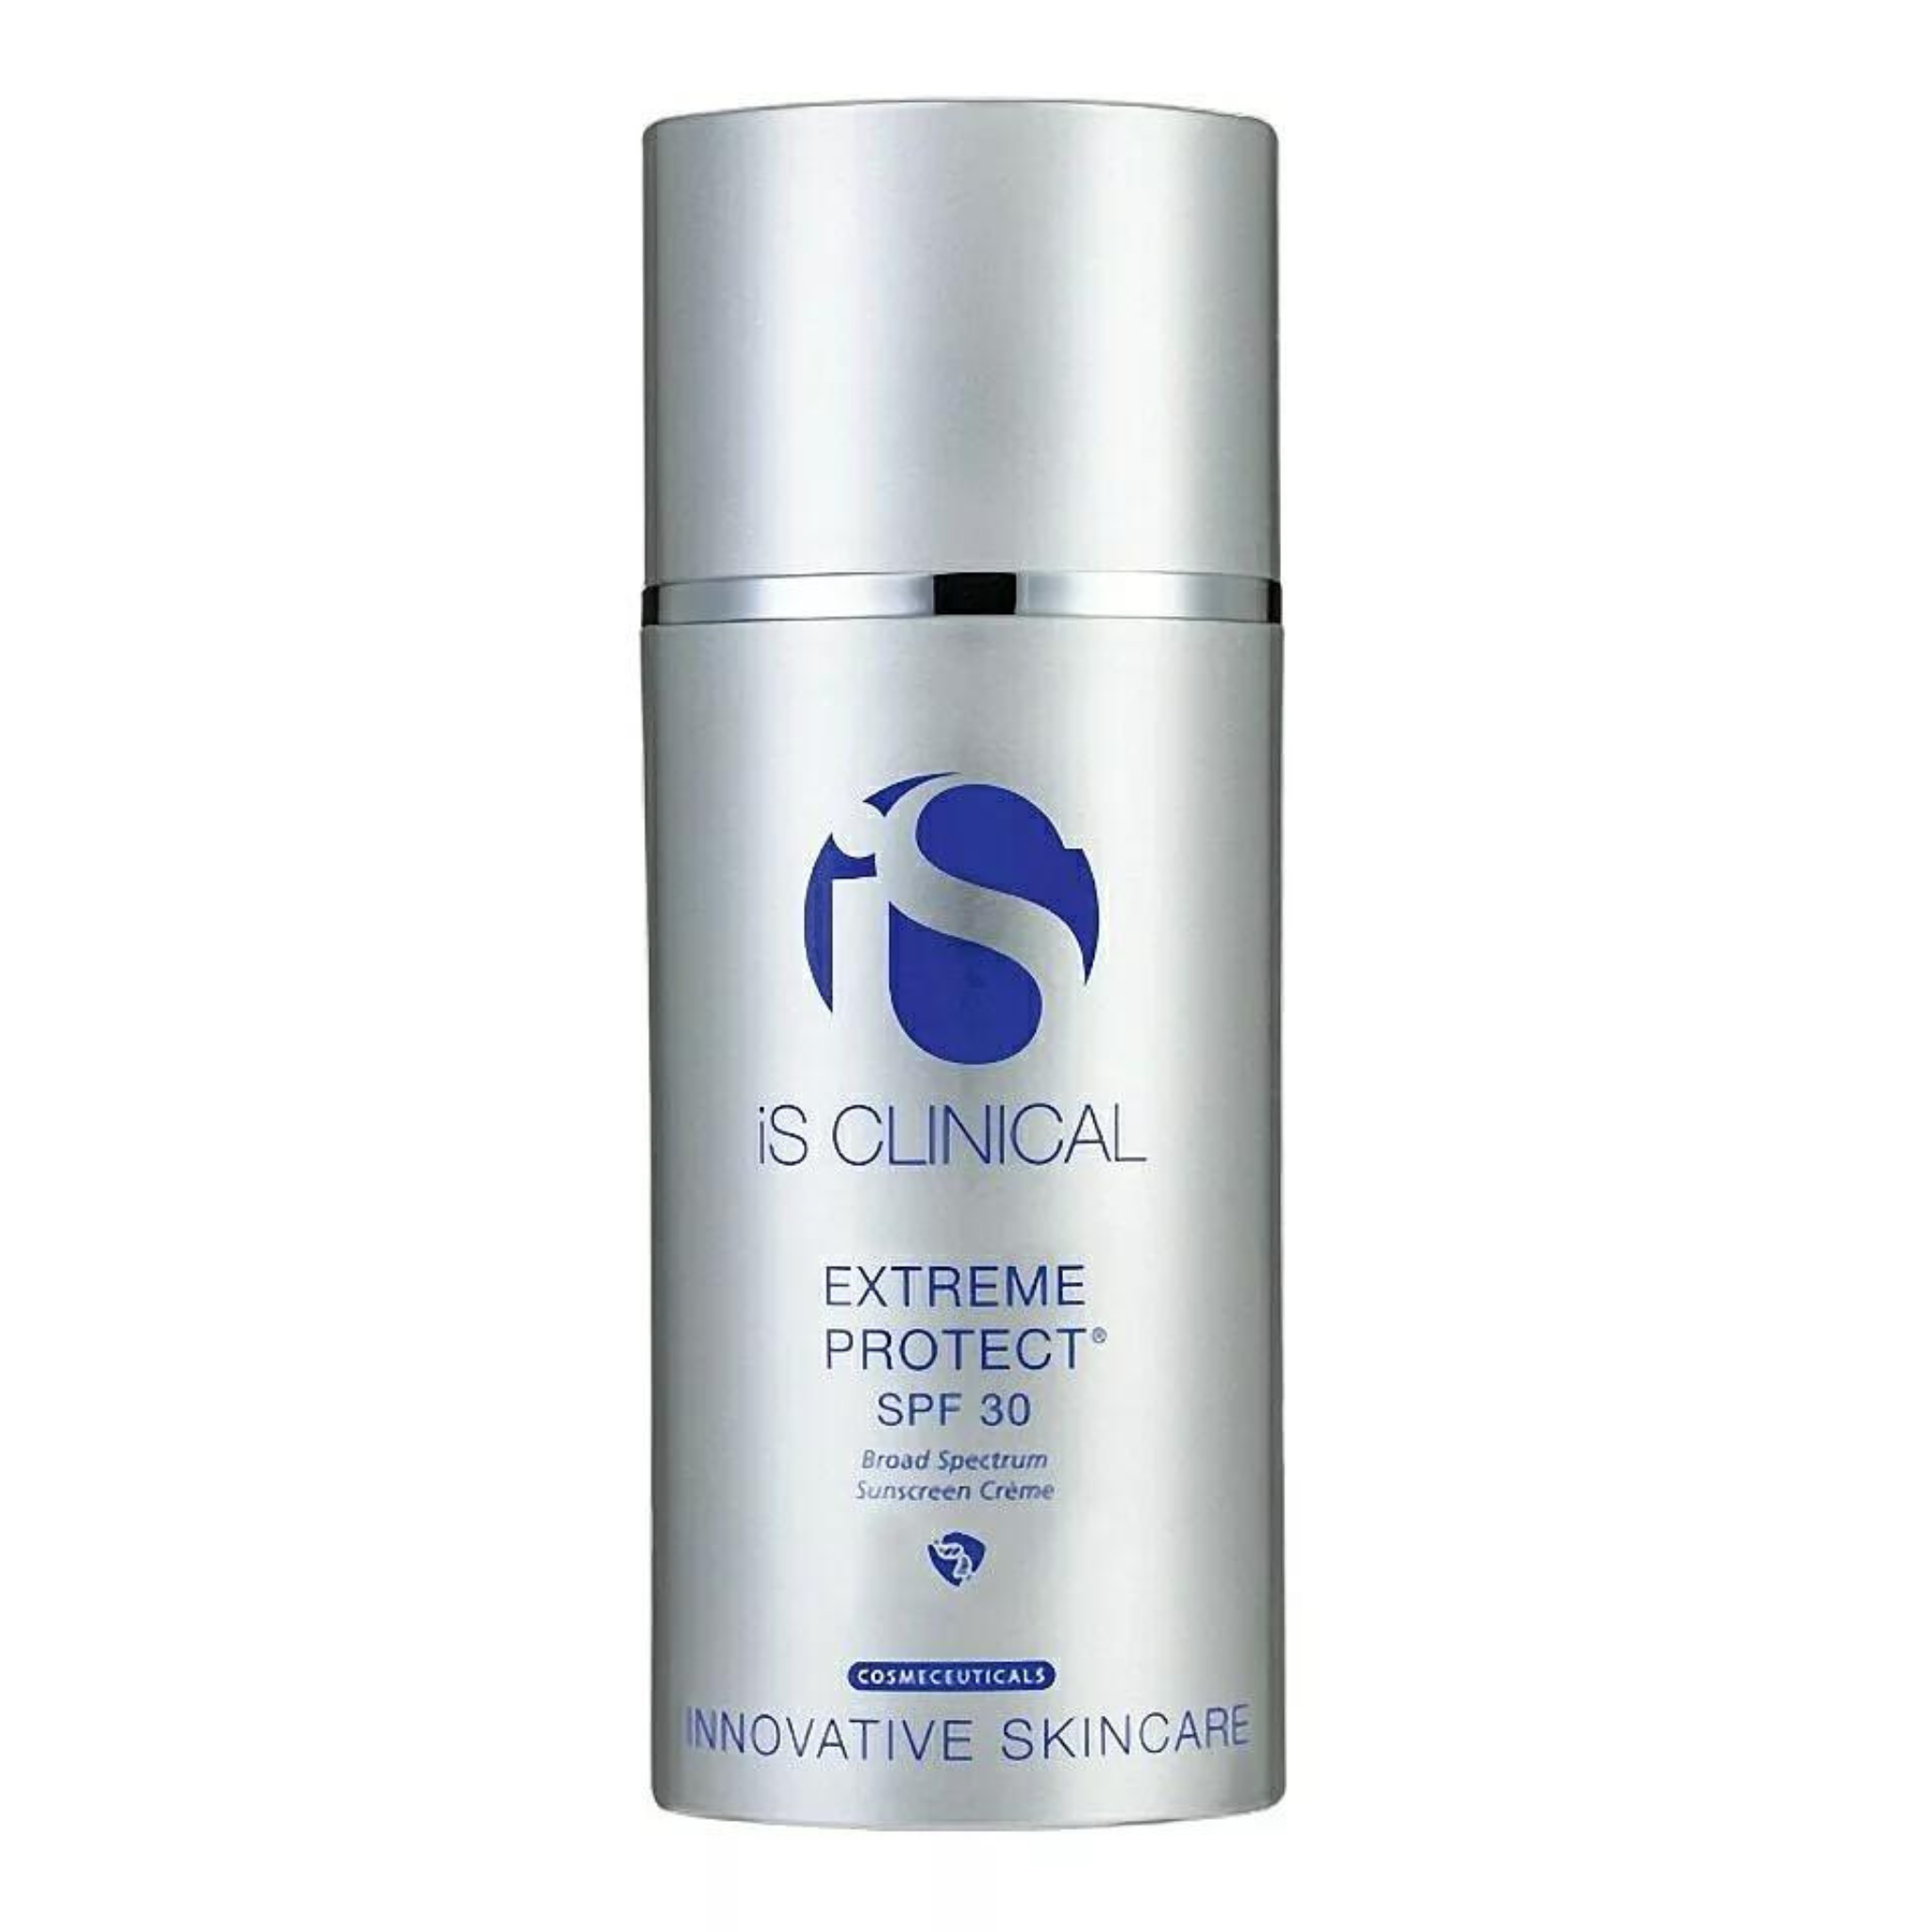 iS Clinical - Extreme Protect SPF 30